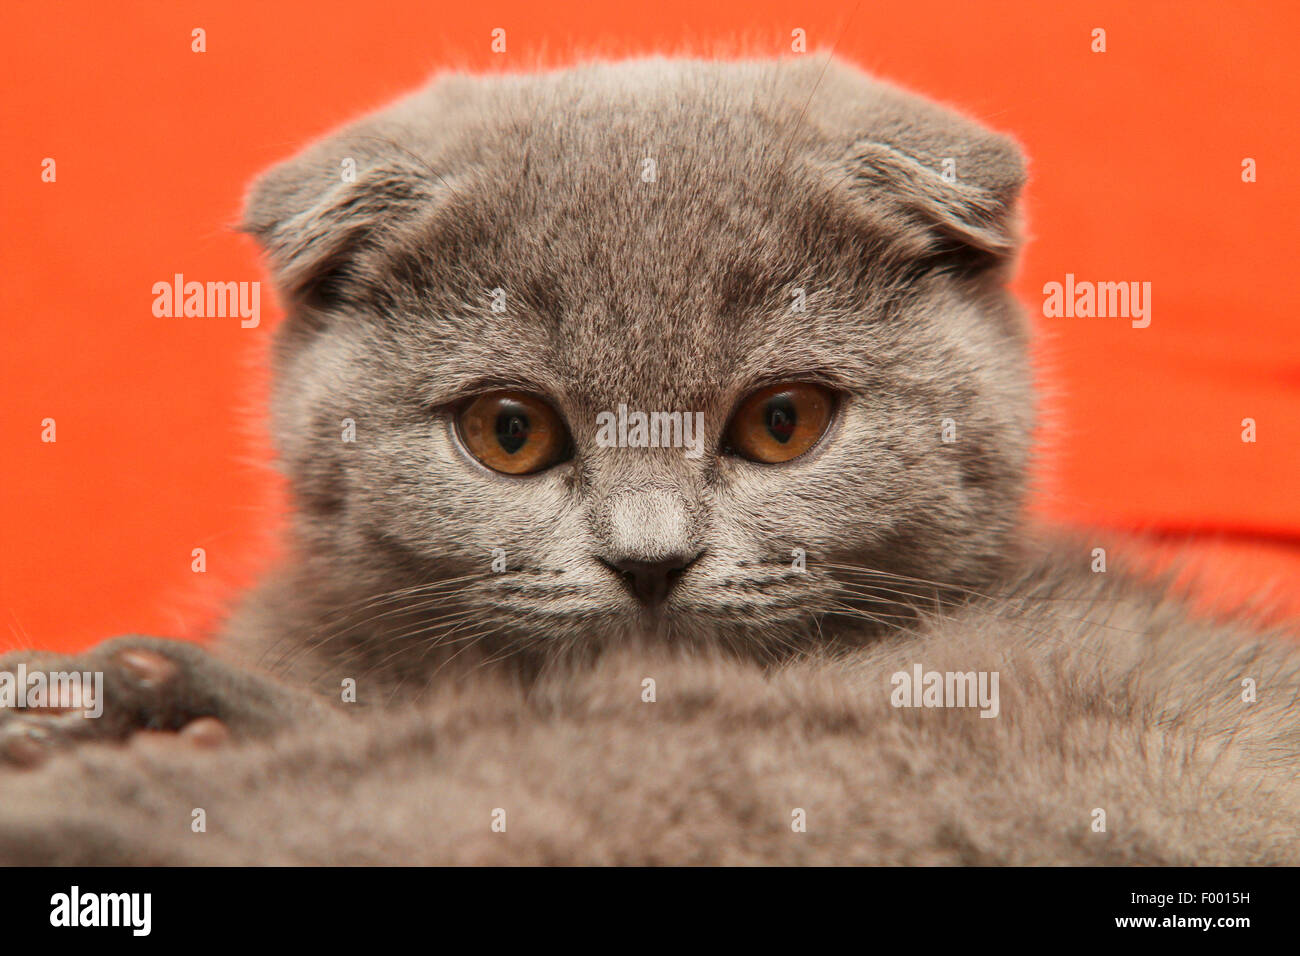 British Shorthair (Felis silvestris f. catus), little grey-haired British Shorthair kitten with floppy ears in front of red background, portrait Stock Photo